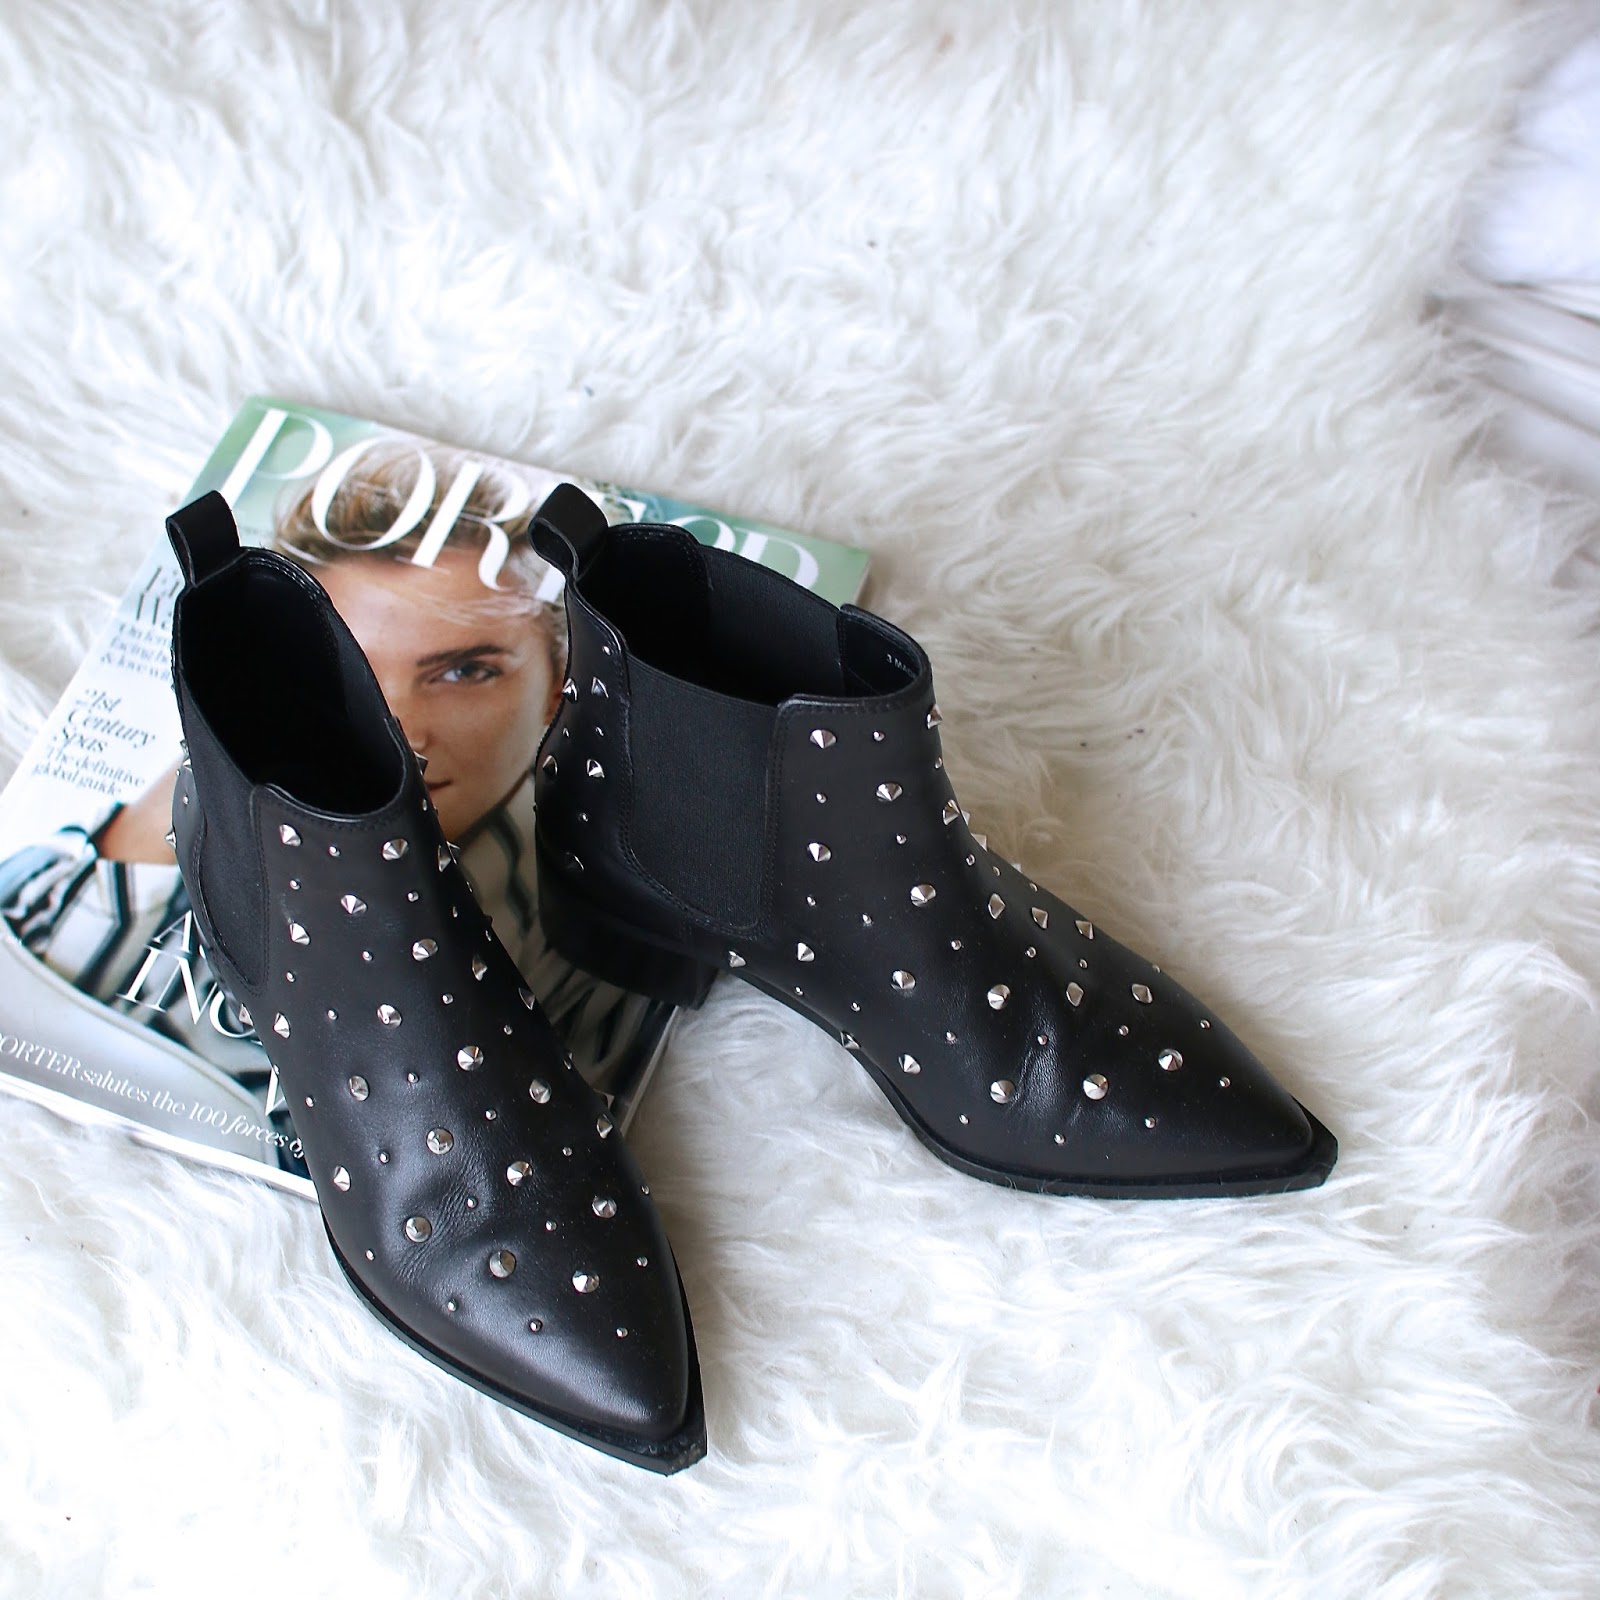 black studded ankle boots sitting on a fur mat